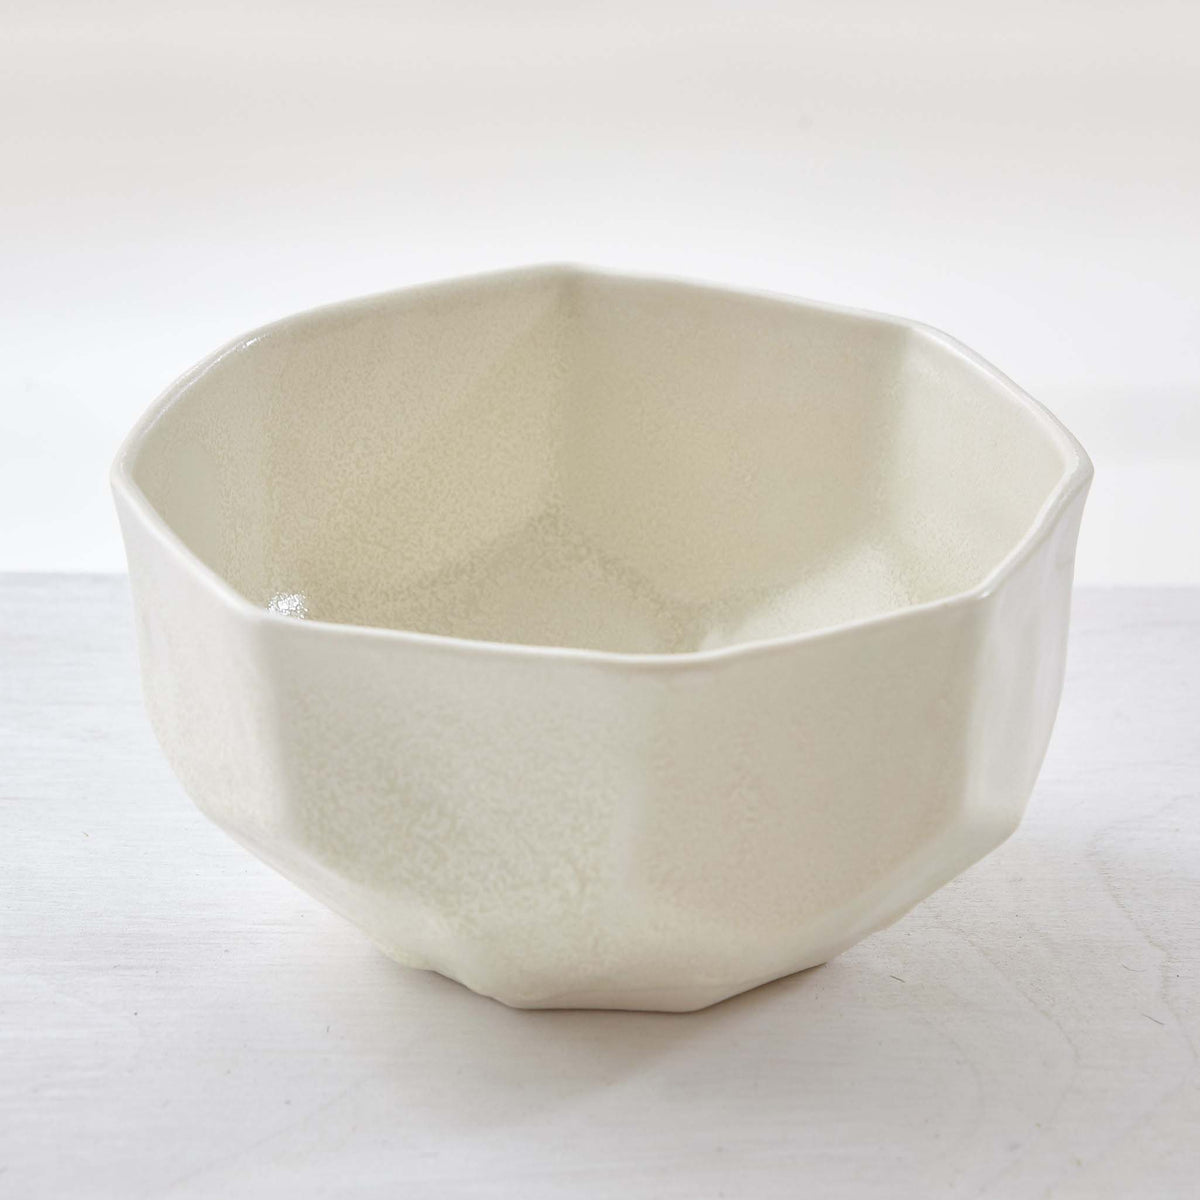 HANDCRAFTED FACETED CERAMIC BOWLS